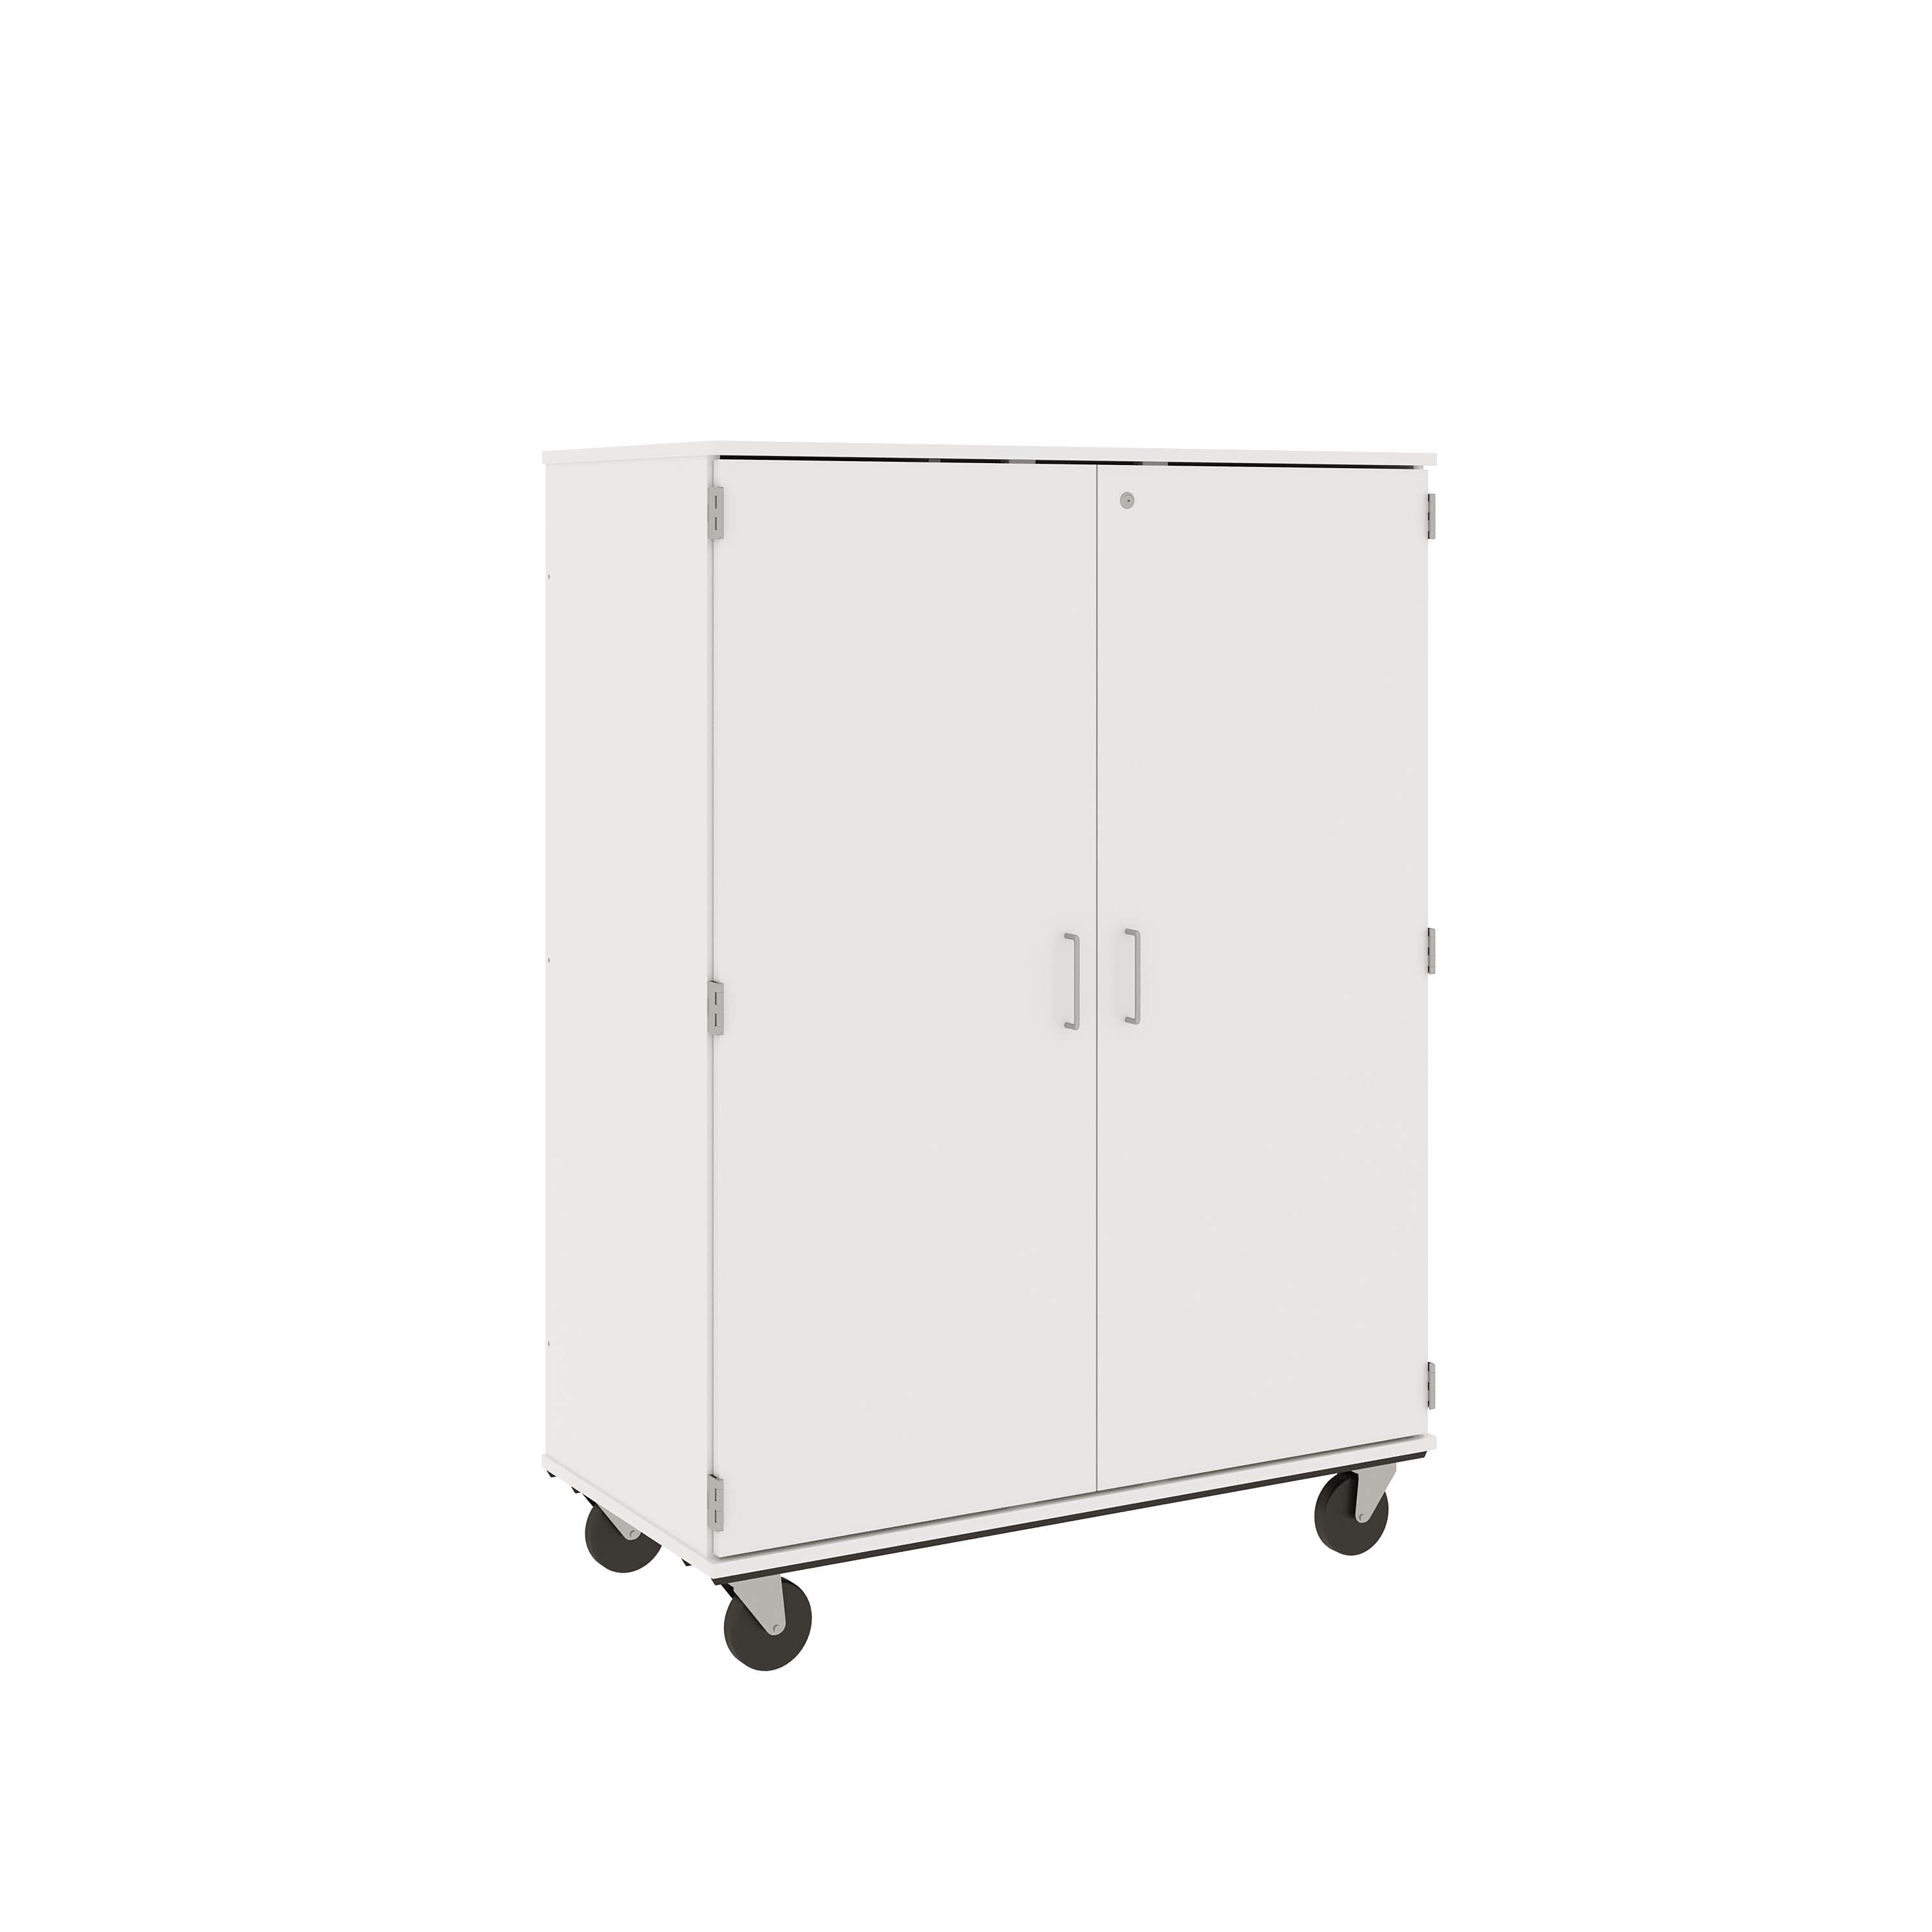 67" Tall Assembled Mobile Wardrobe Cabinet with File Drawer - 80609 F67